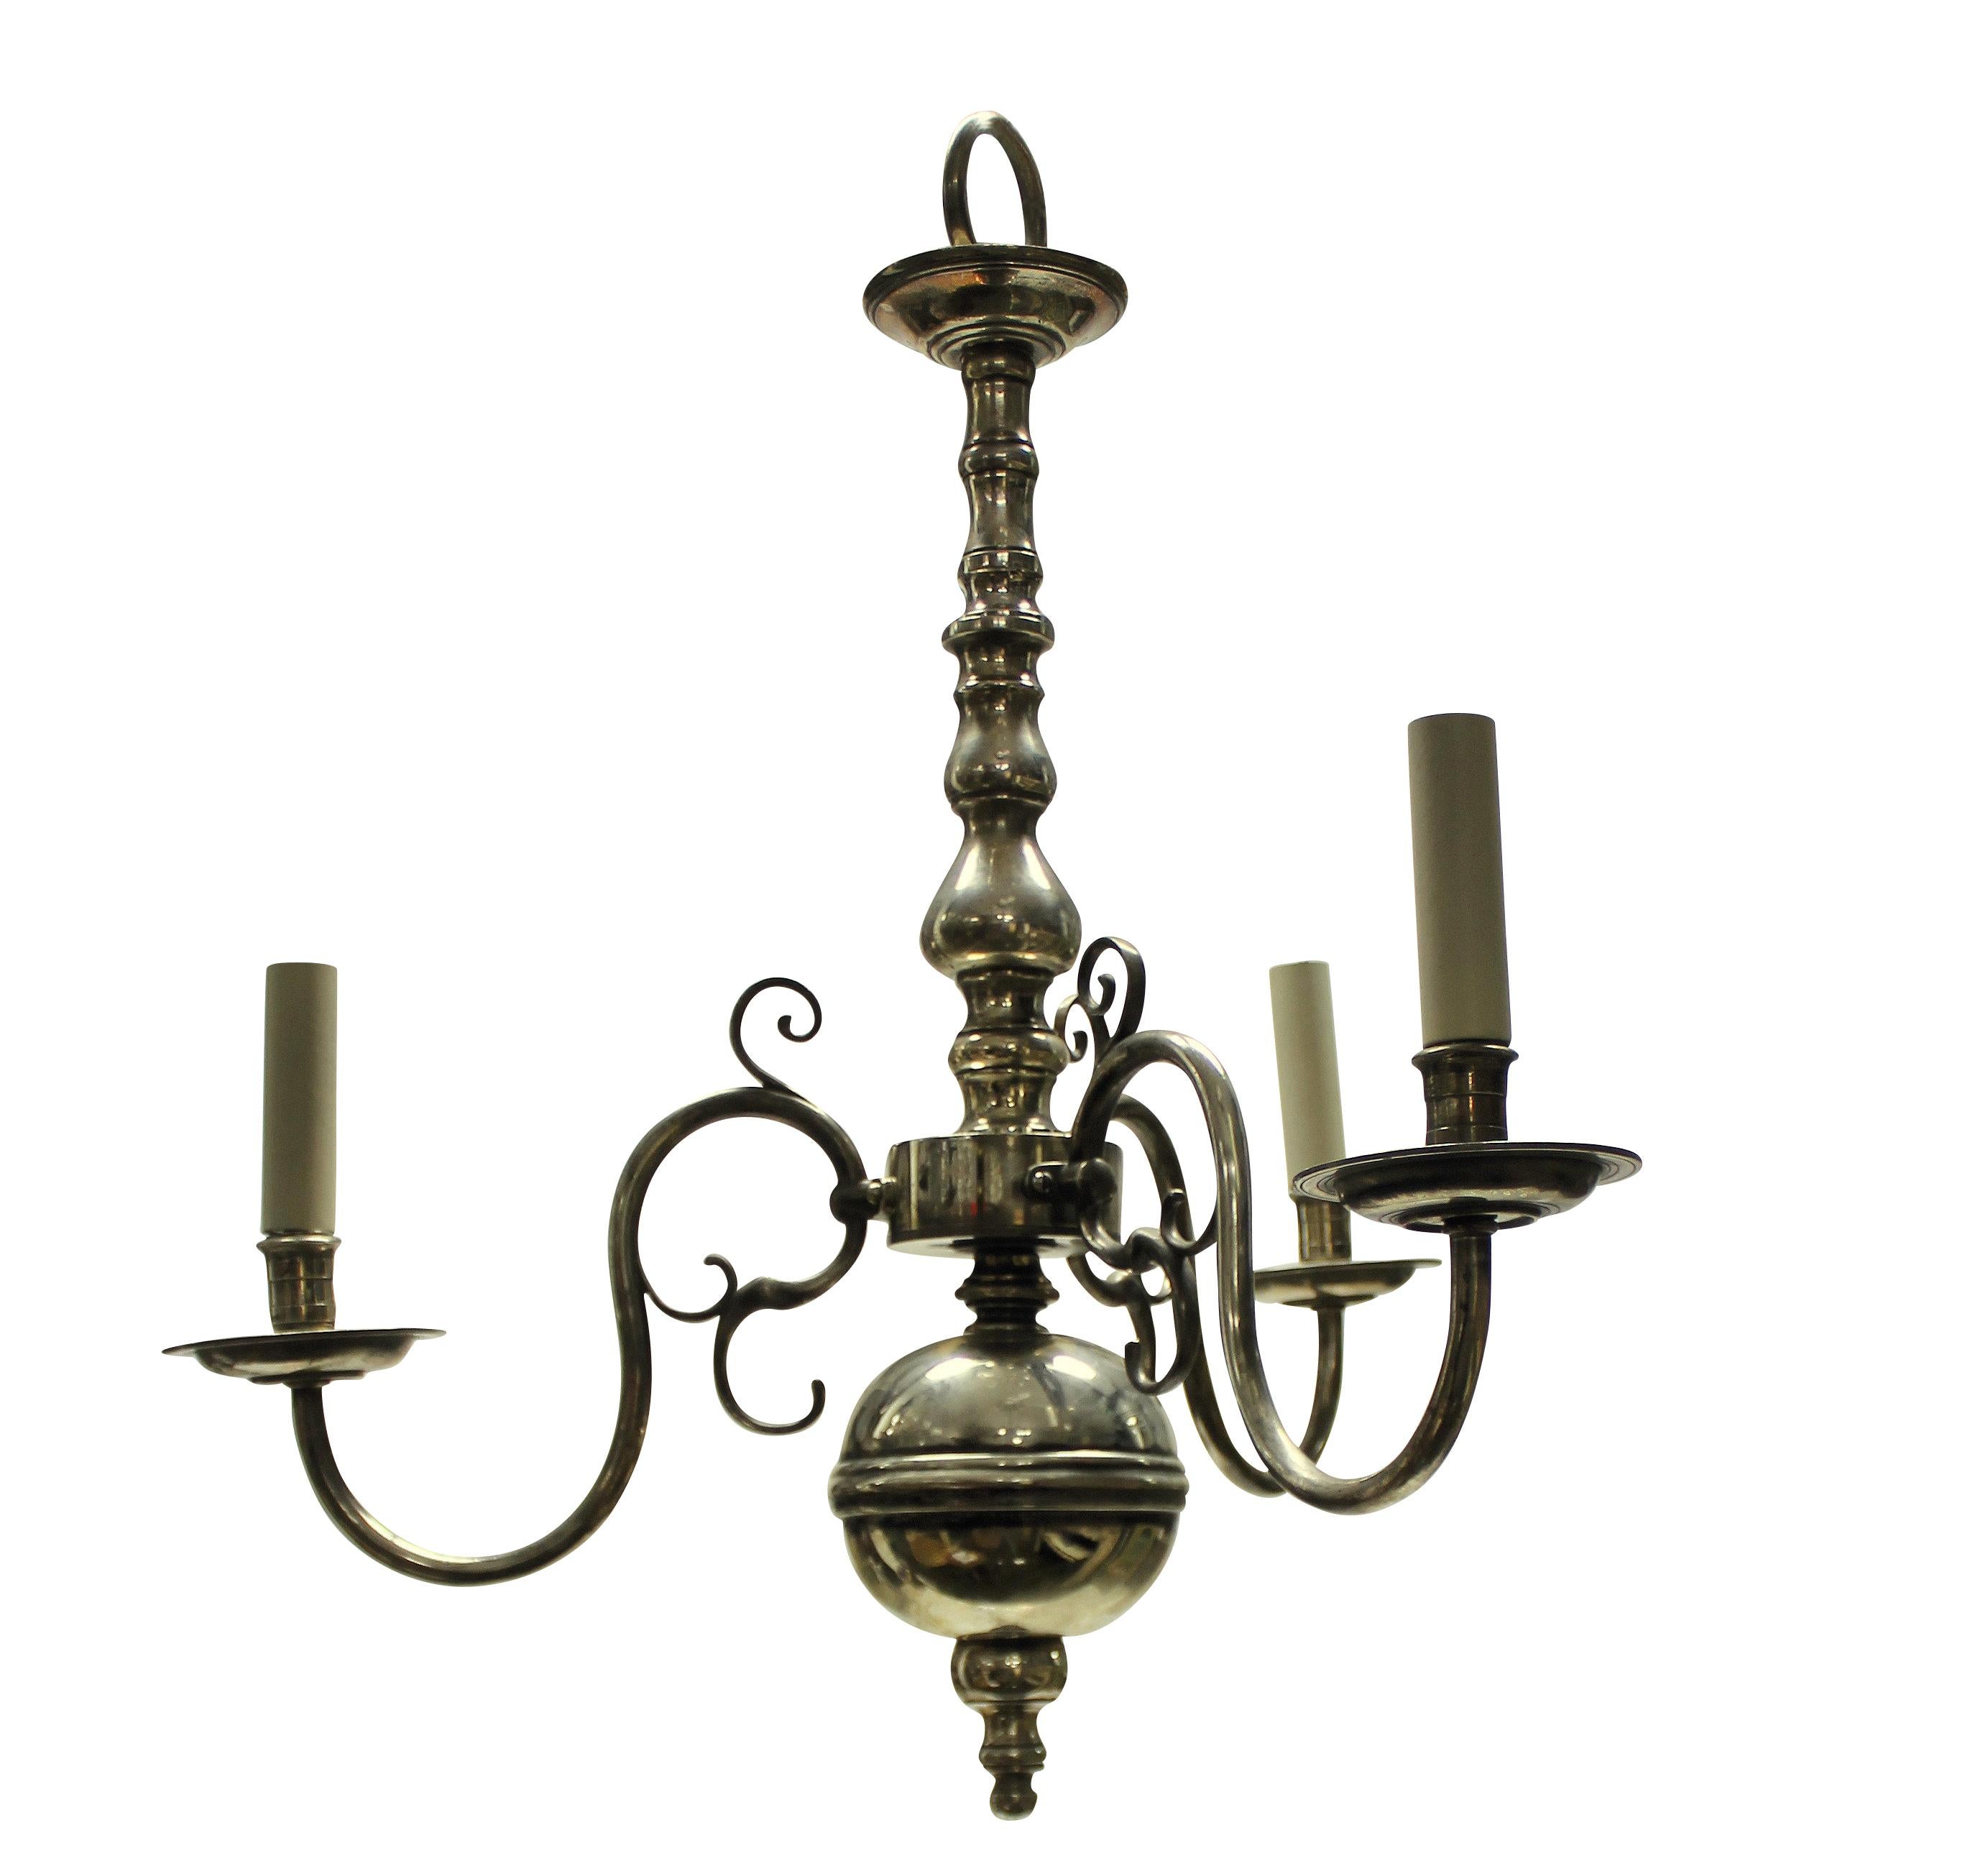 An English silver plated three branch chandelier in the 17th century manner.